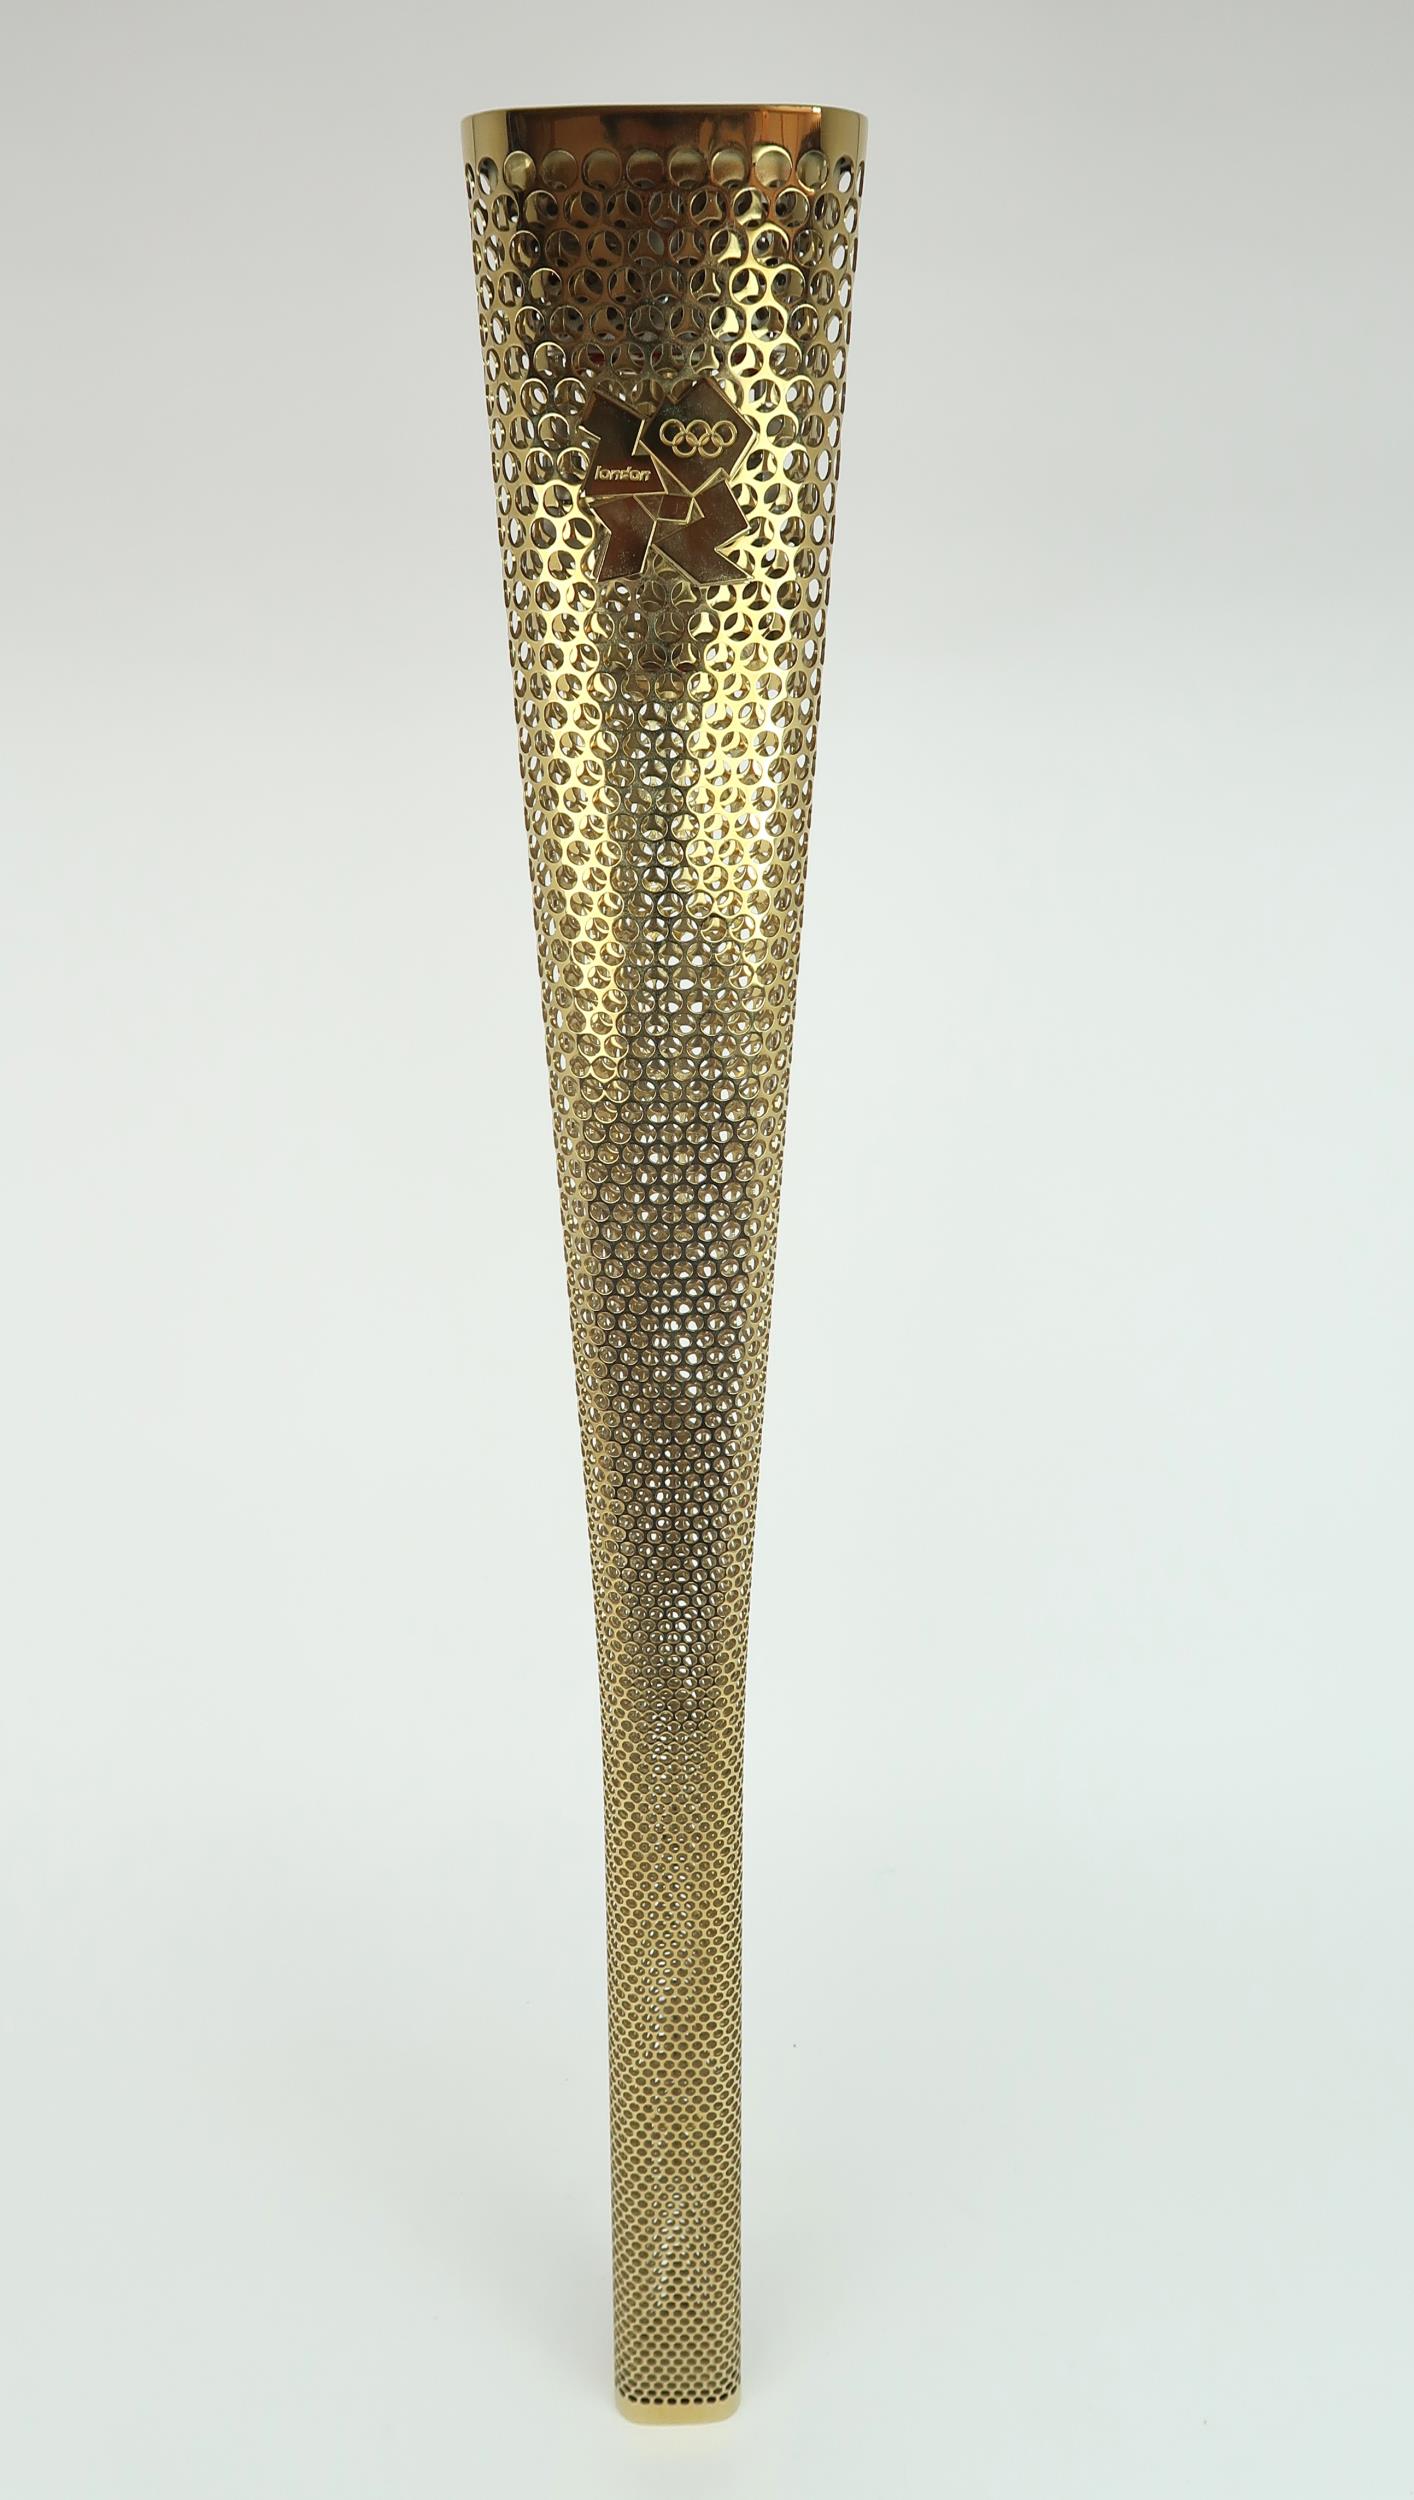 A LONDON 2012 OLYMPIC BEARER'S TORCH Of tapering, triangular form, gold coloured, bearing the